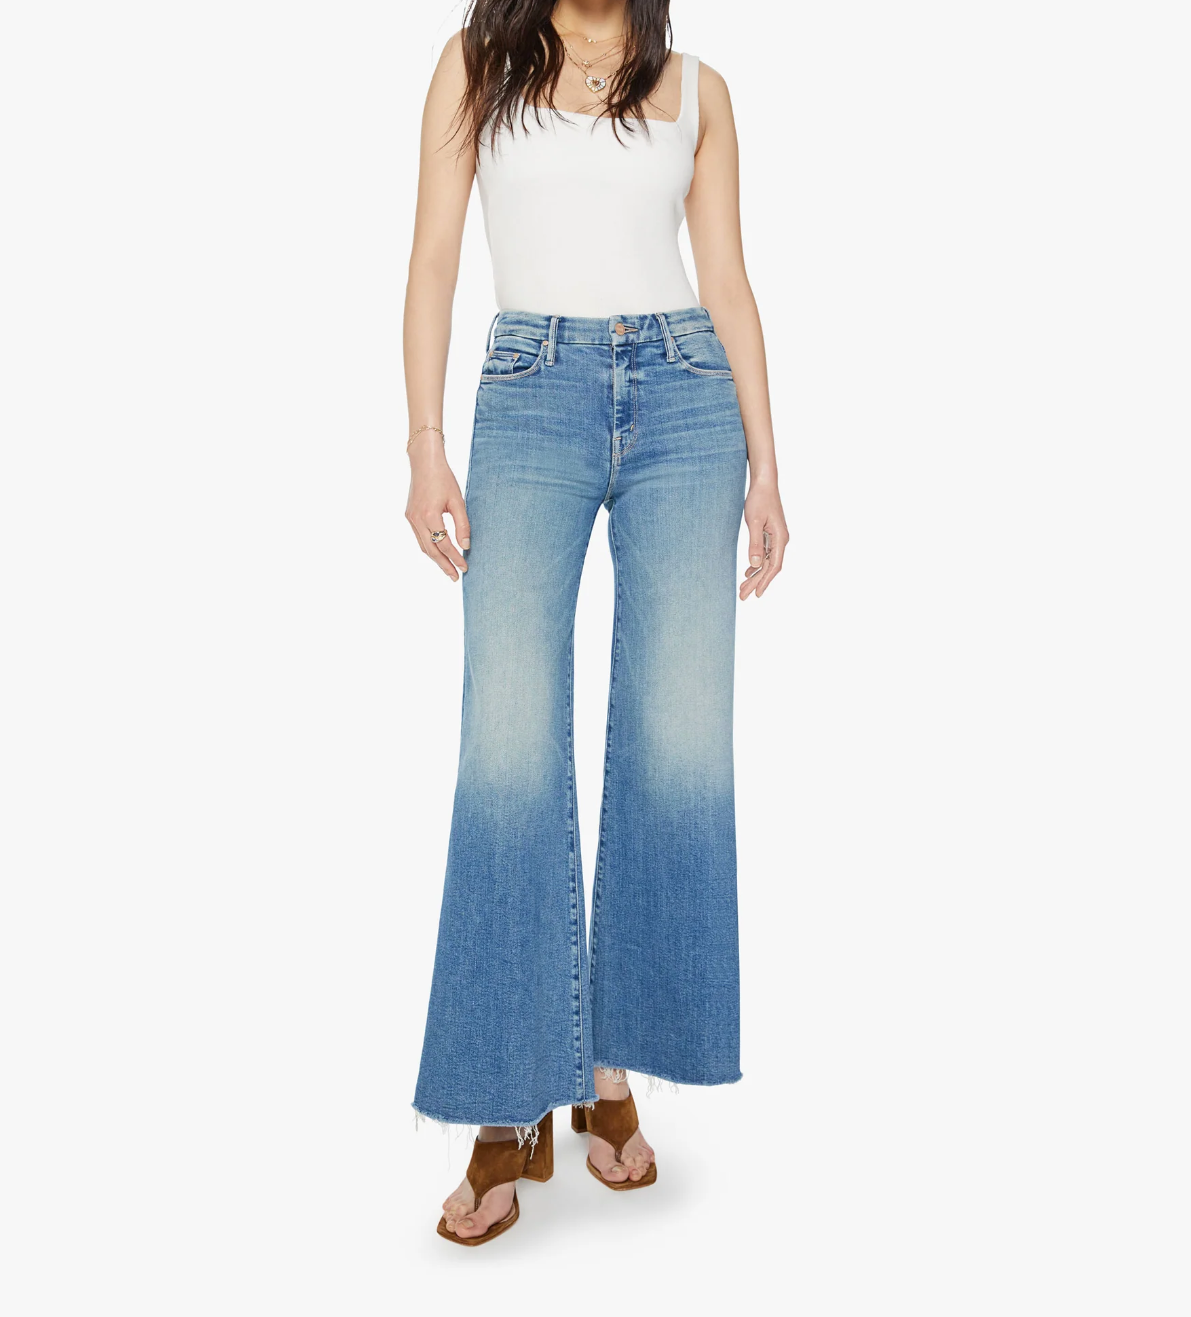 Women's Step Fray Jeans, Free US Shipping & Returns